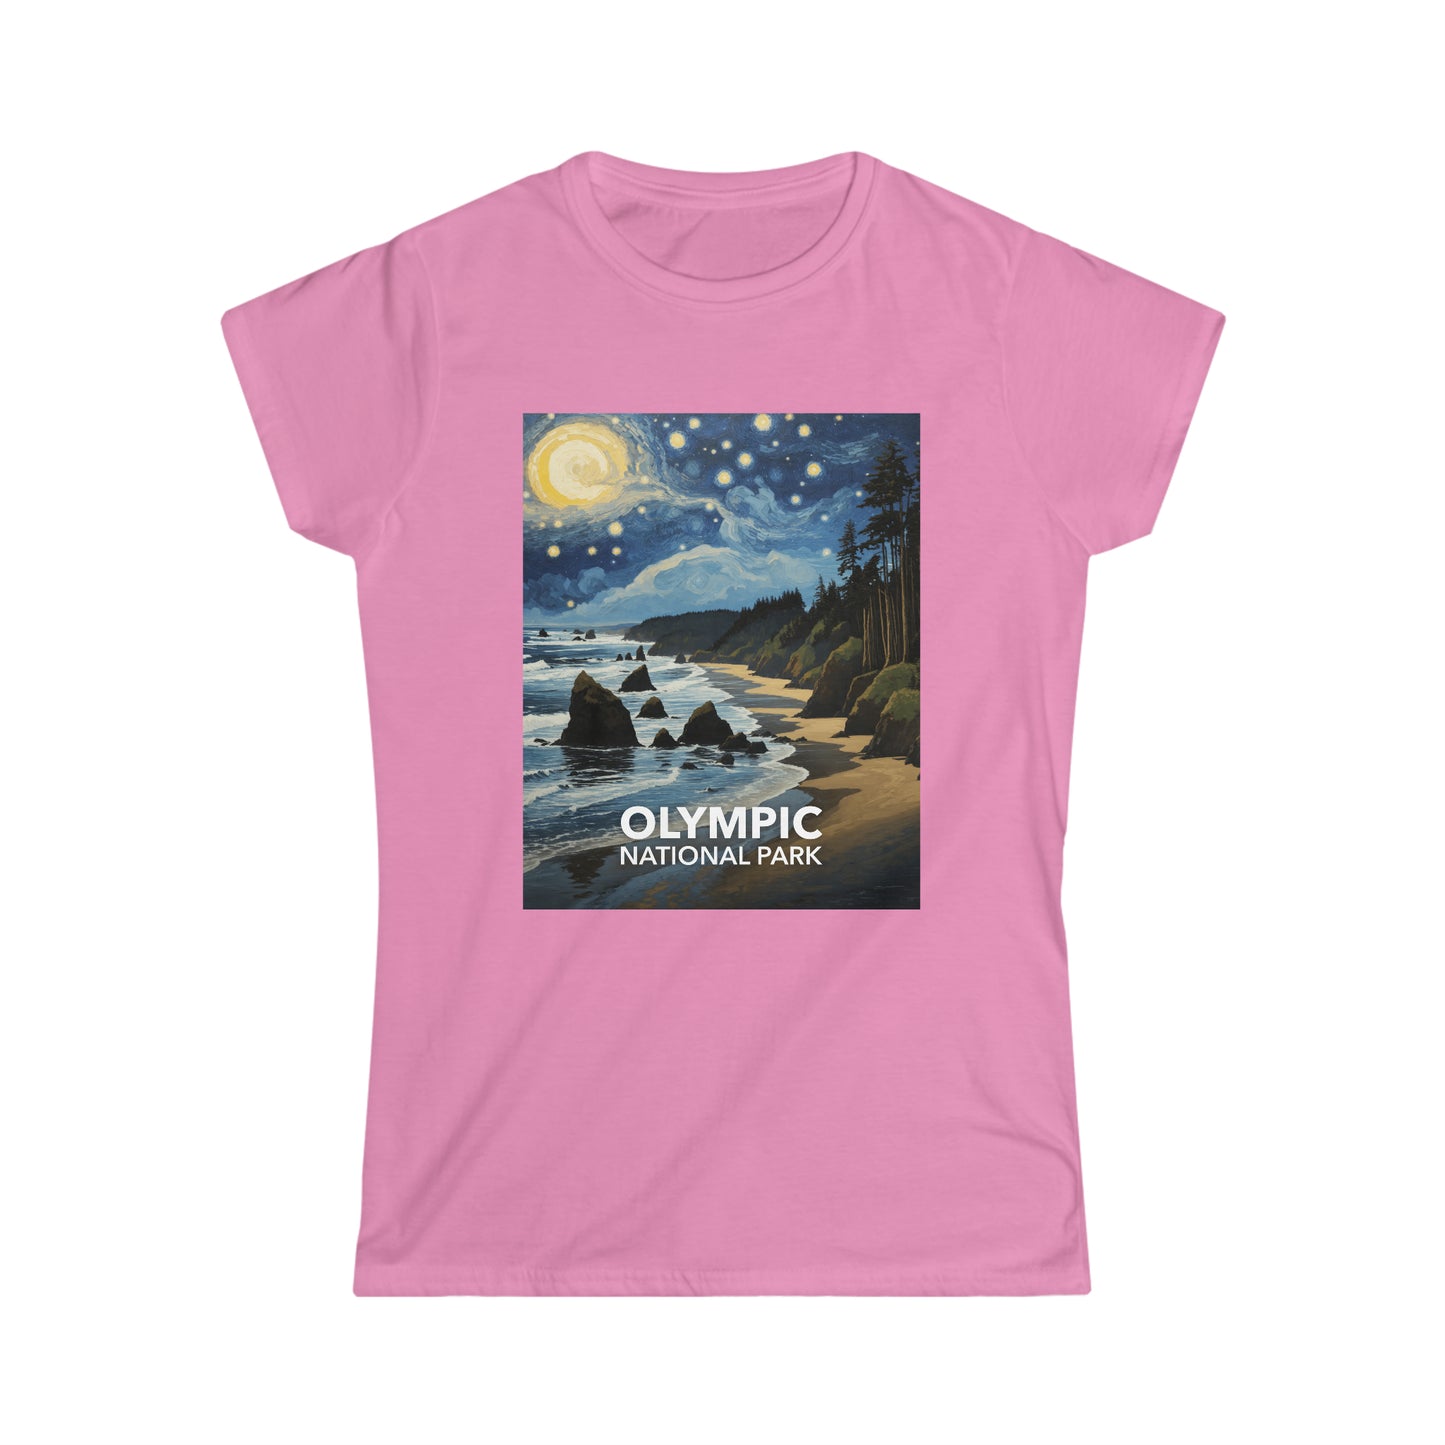 Olympic National Park T-Shirt - Women's Starry Night